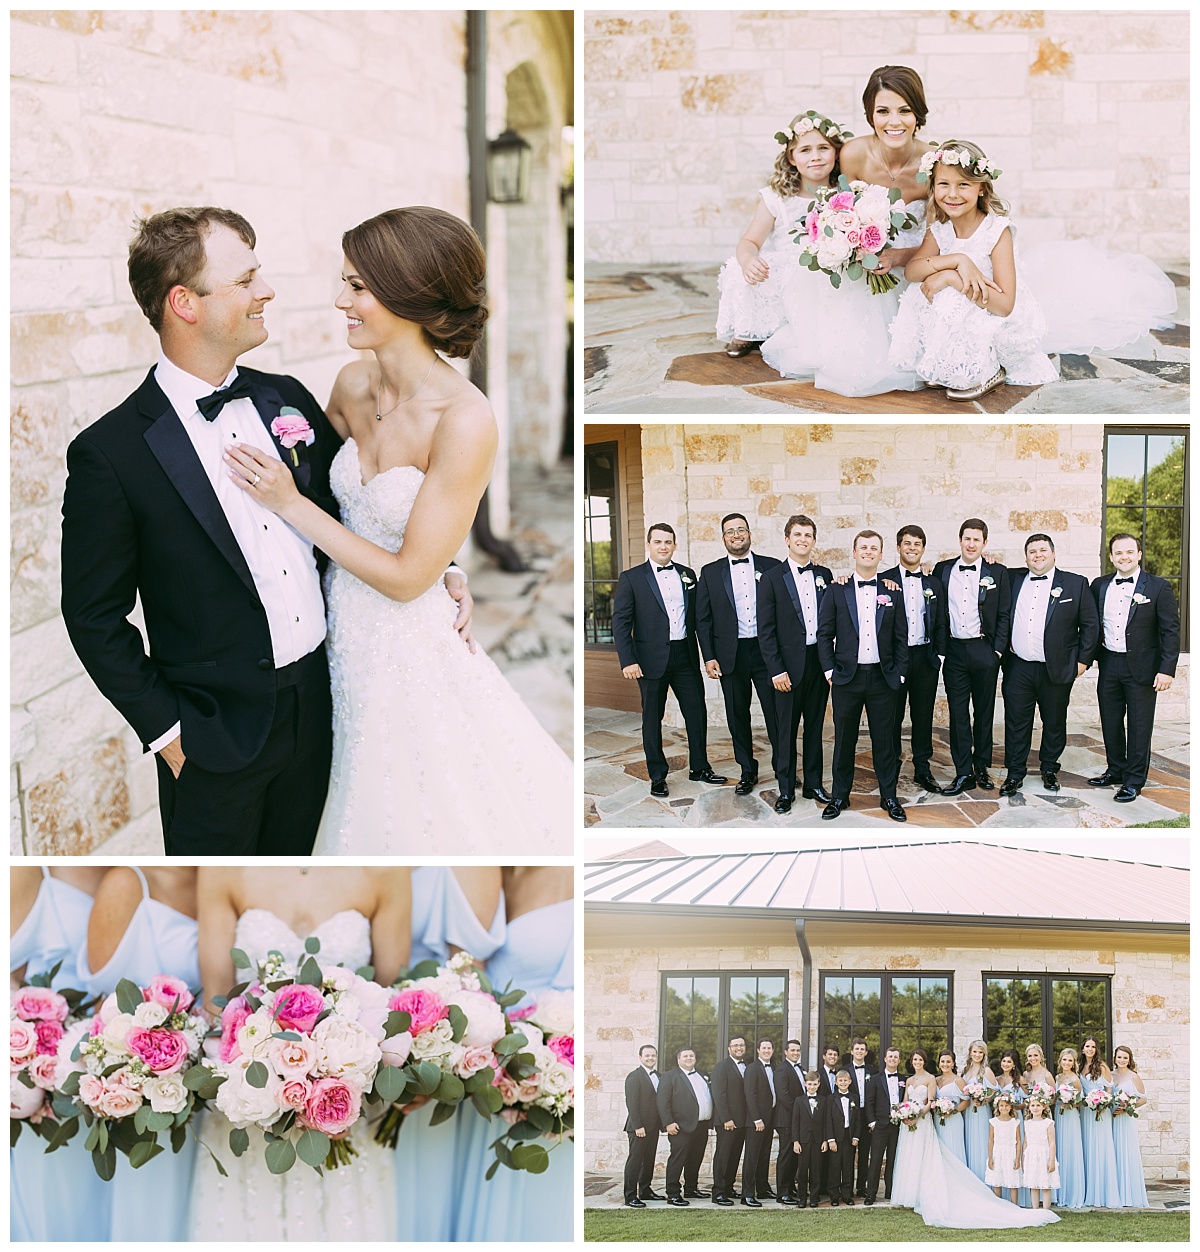 Dallas Wedding, Plano Wedding, Fort Worth Wedding, The Laurel Wedding, Summer Wedding, Spring Wedding, Wedding Flowers, white and pink flowers, traditional wedding Flowers,  A & L Floral Design